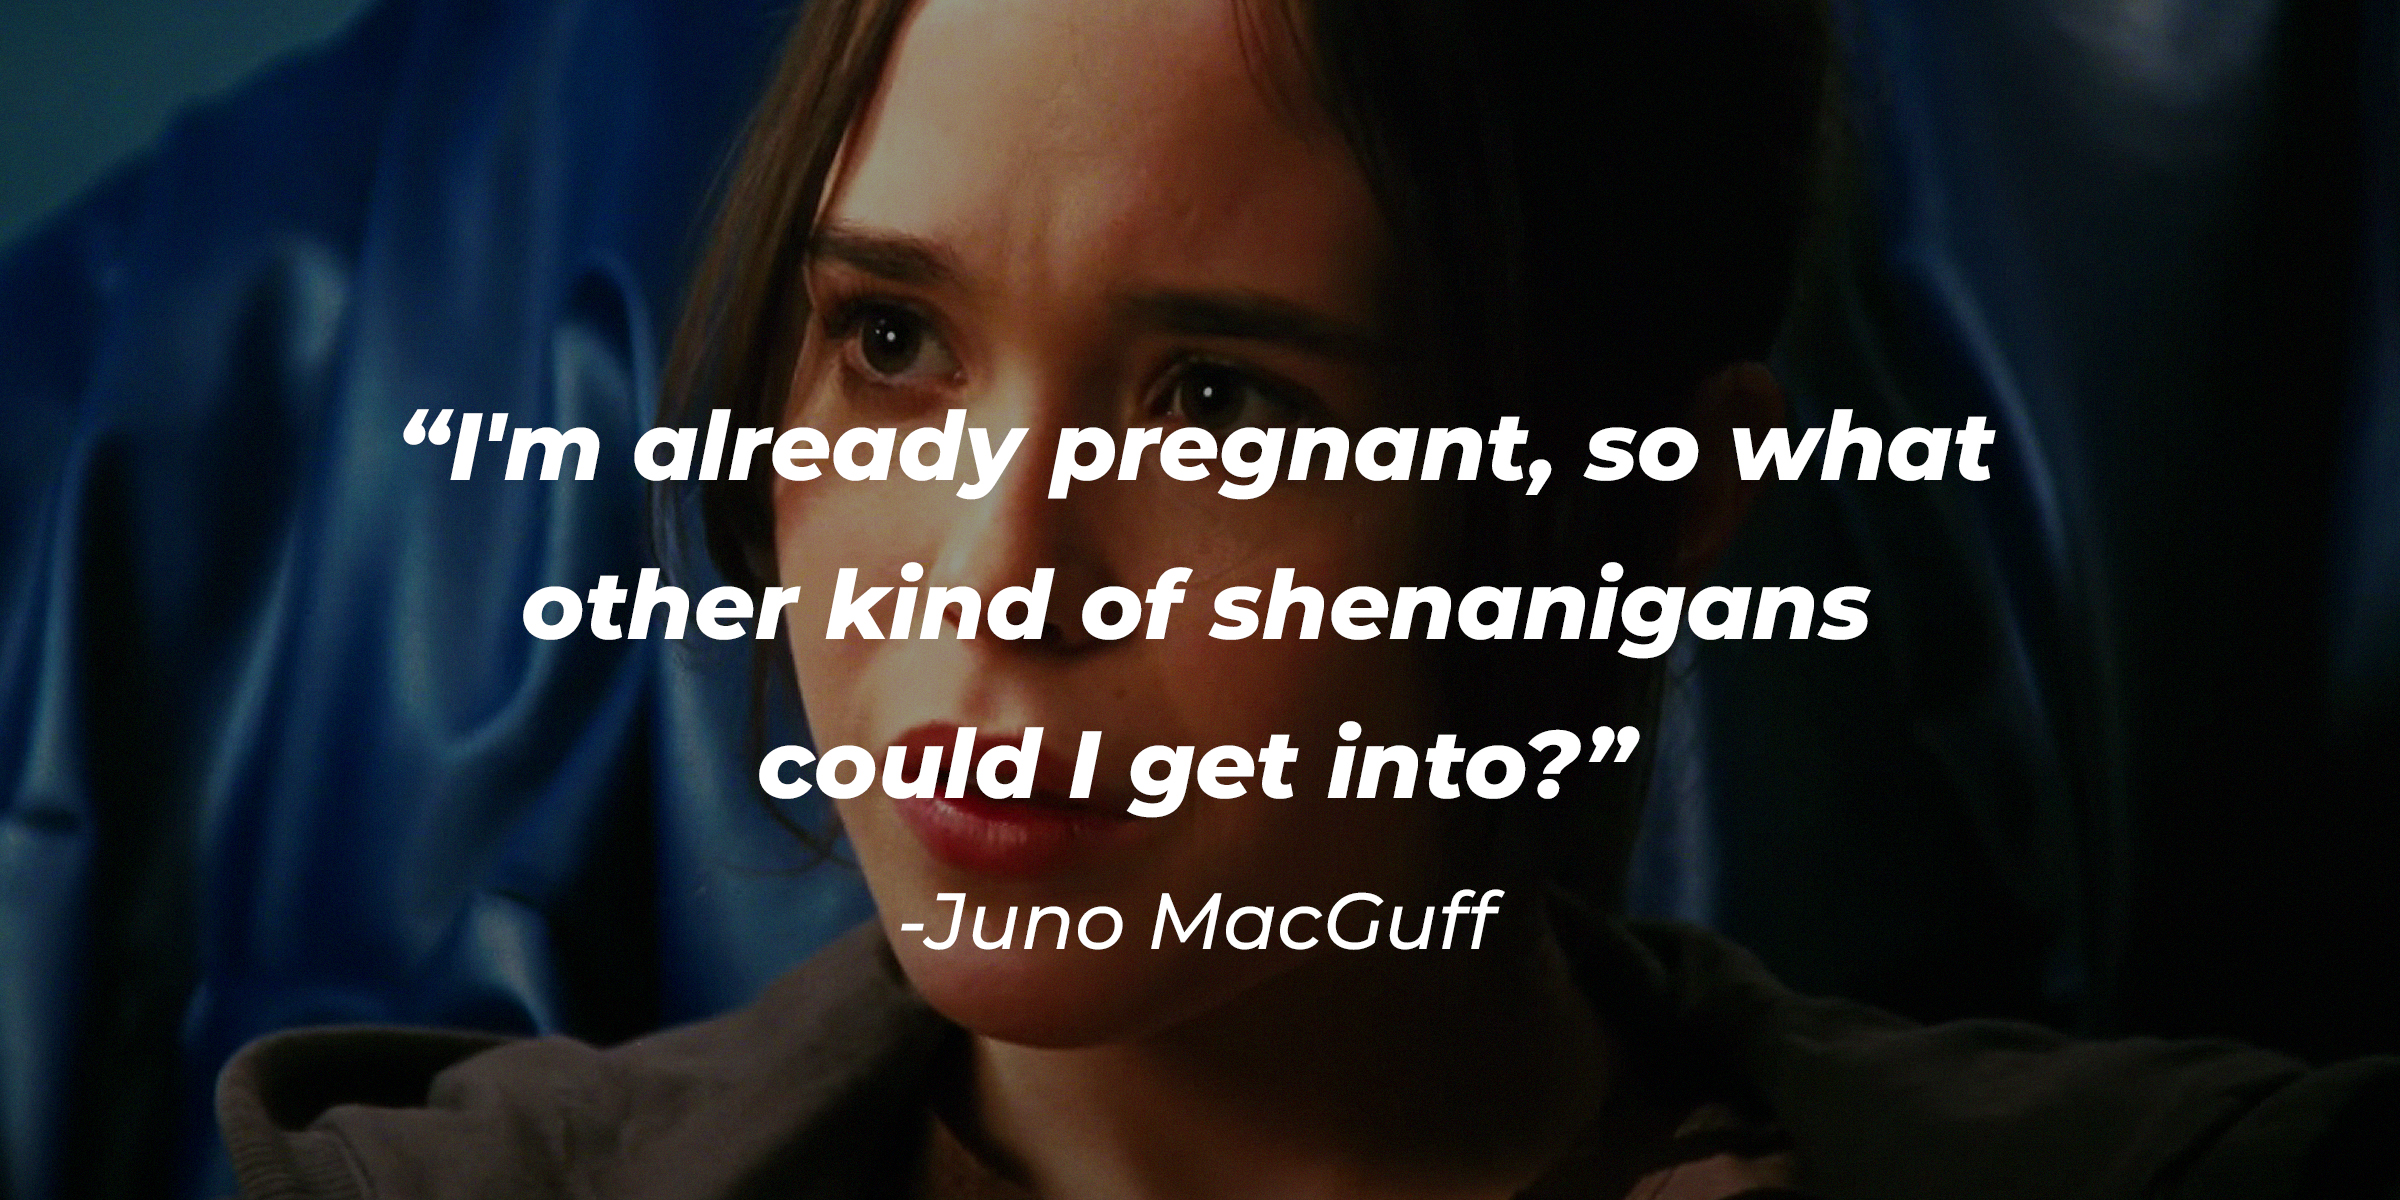 Juno MacGuff, with her quote: “I'm already pregnant, so what other kind of shenanigans could I get into?” | Source: Facebook.com/JunoTheMovie